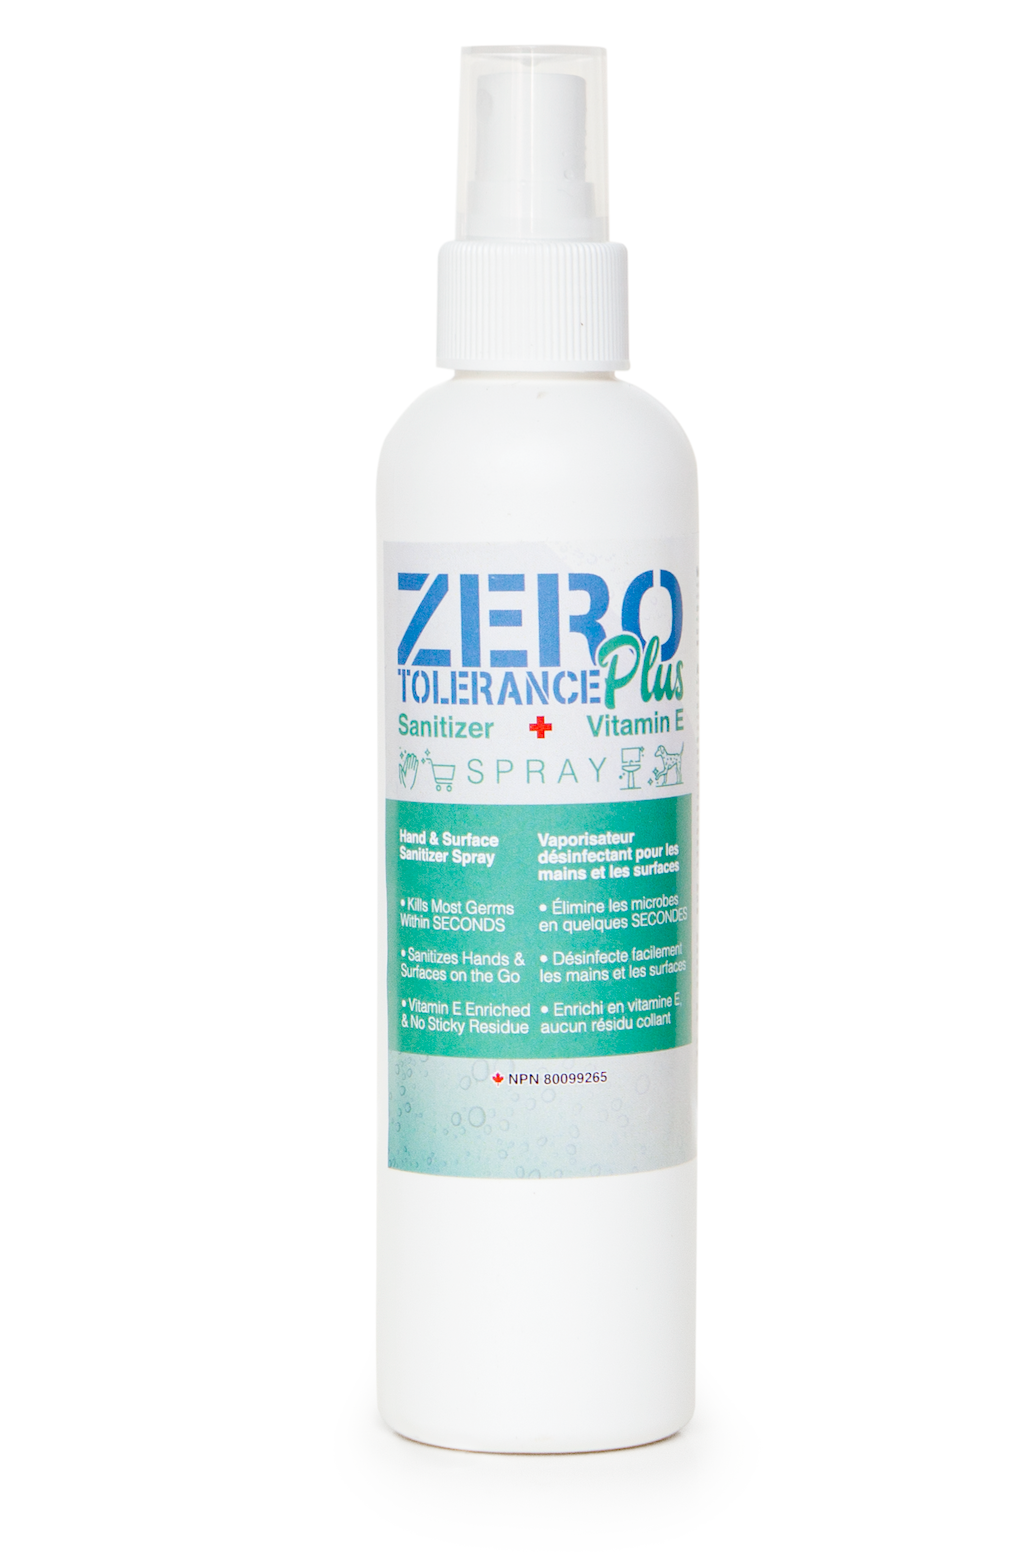 Zero Tolerance Plus Hand/Surface Sanitizing Spray with Vitamin E - 8oz - ProCare Outlet by Prohair